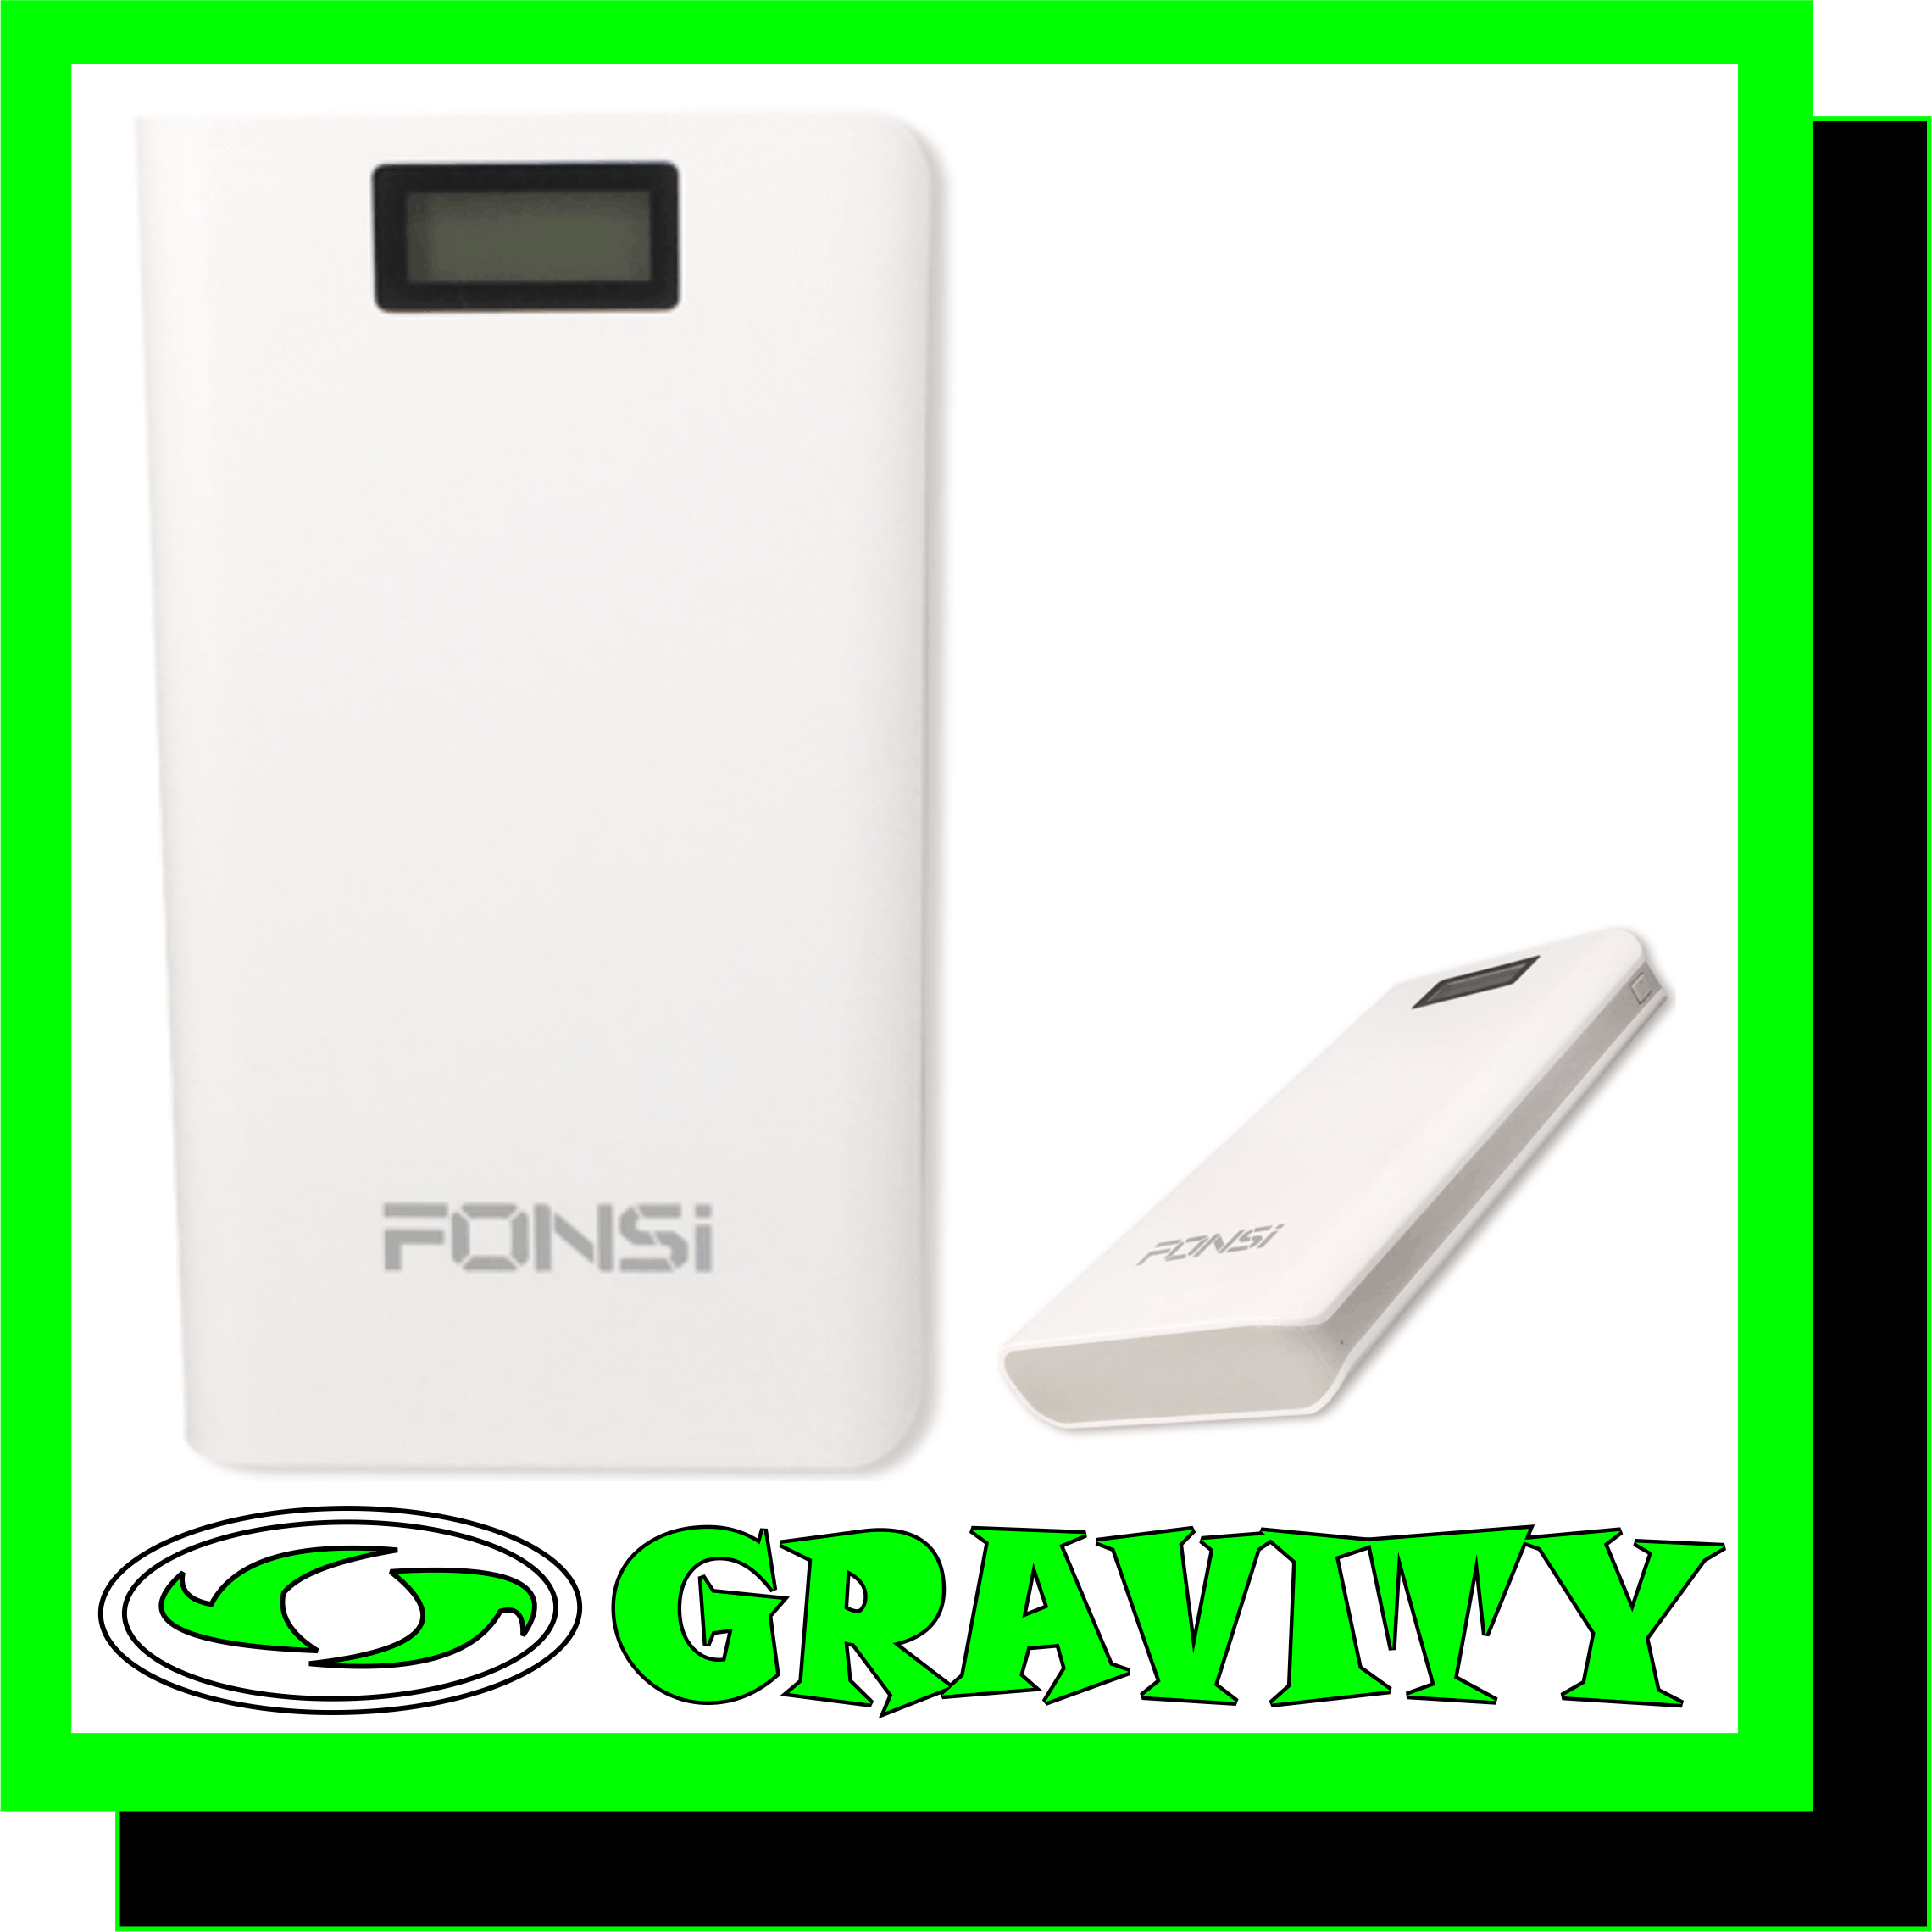 -Large Capacity battery of 30000mAh -Will fully charge your smart-phone up to 10 times -Ideal for: mobile phones, MP3 Players, gaming devices, tablets and more… -Flip-Up bright Light/torch function with a strobe option -2 x Output ( 1 x 5V 1A, 2 x 5V 2.1A) -Power LED Indicator -High efficiency of power conversion -Electricity saving function -User Friendly -Long cycle life -Rapid Charge -Battery protective IC